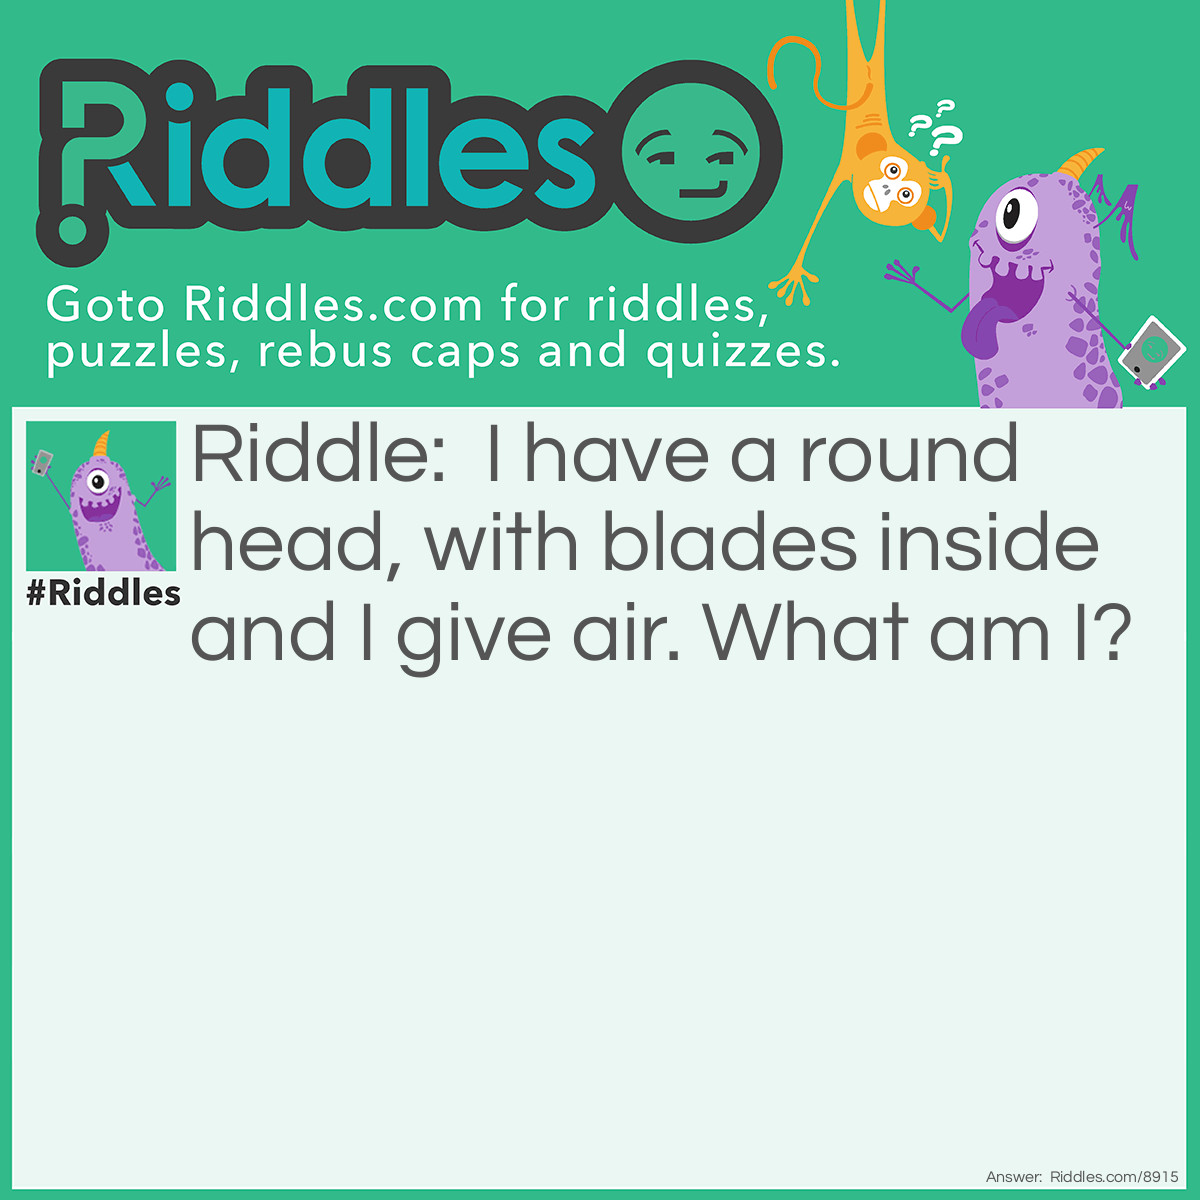 Riddle: I have a round head, with blades inside and I give air. What am I? Answer: A fan.